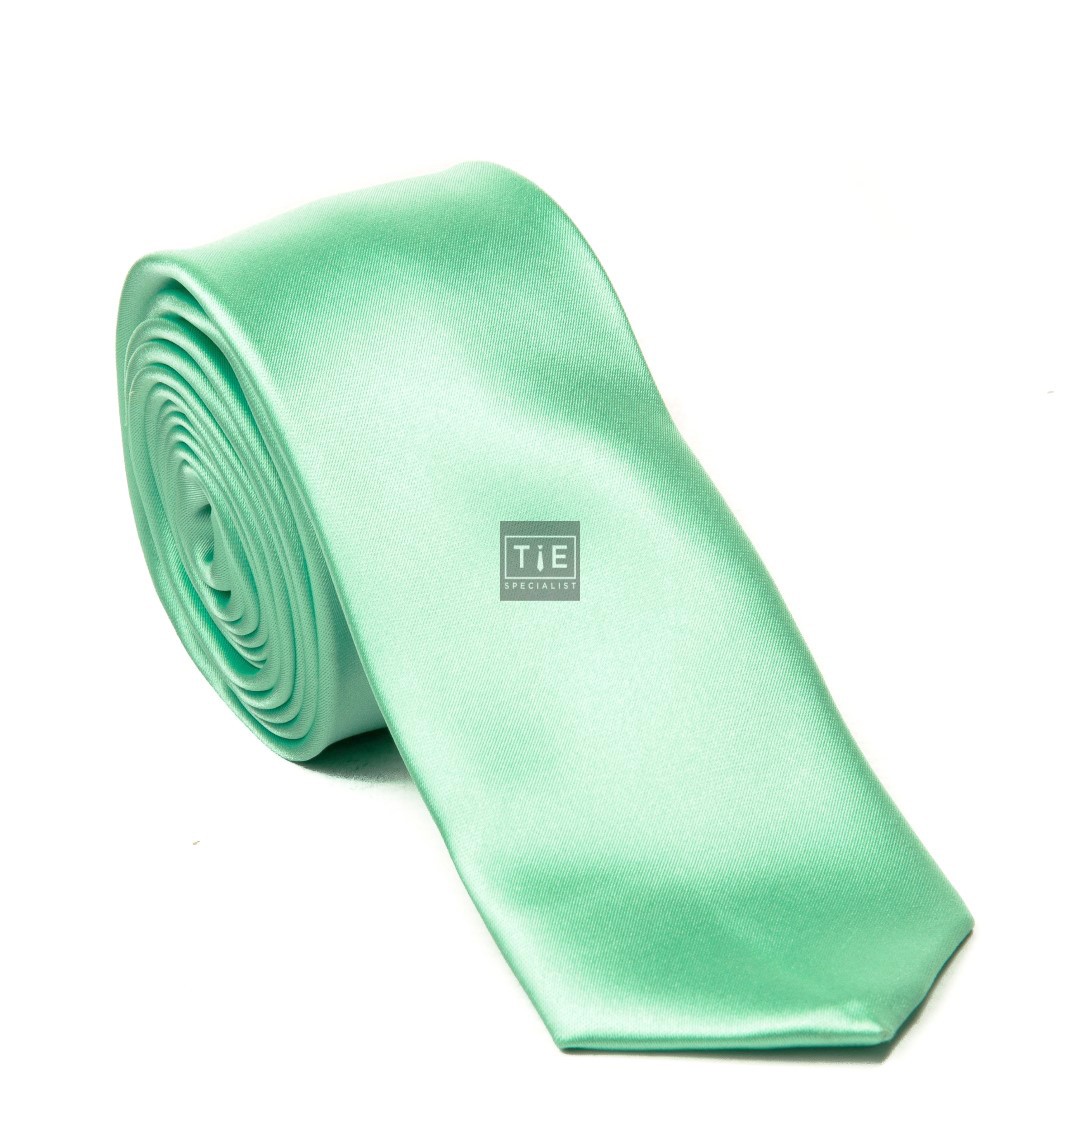 Mint Satin Tie with Matching Pocket Square